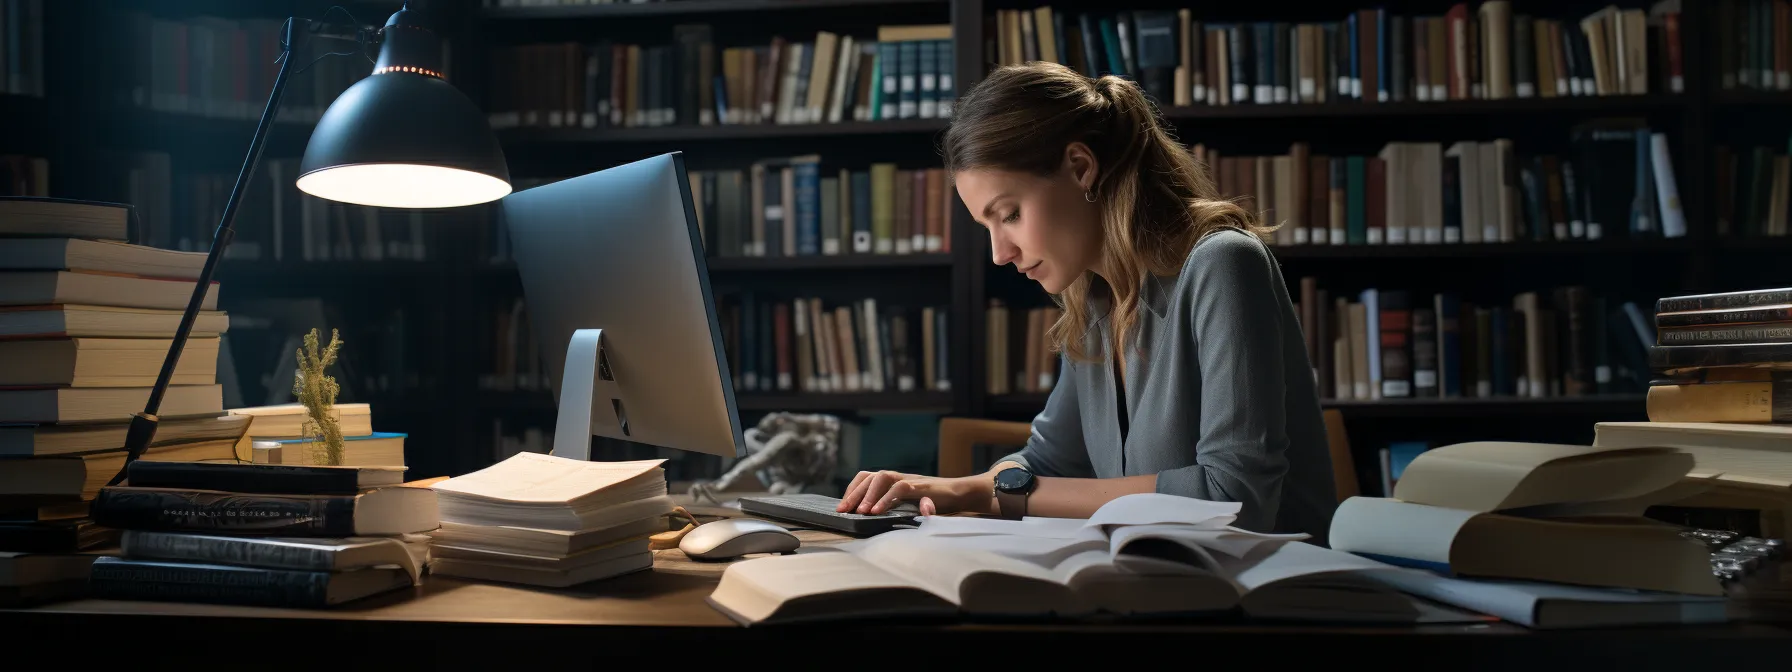 a person sitting at a desk surrounded by books and online resources, studying and analyzing keywords for seo.